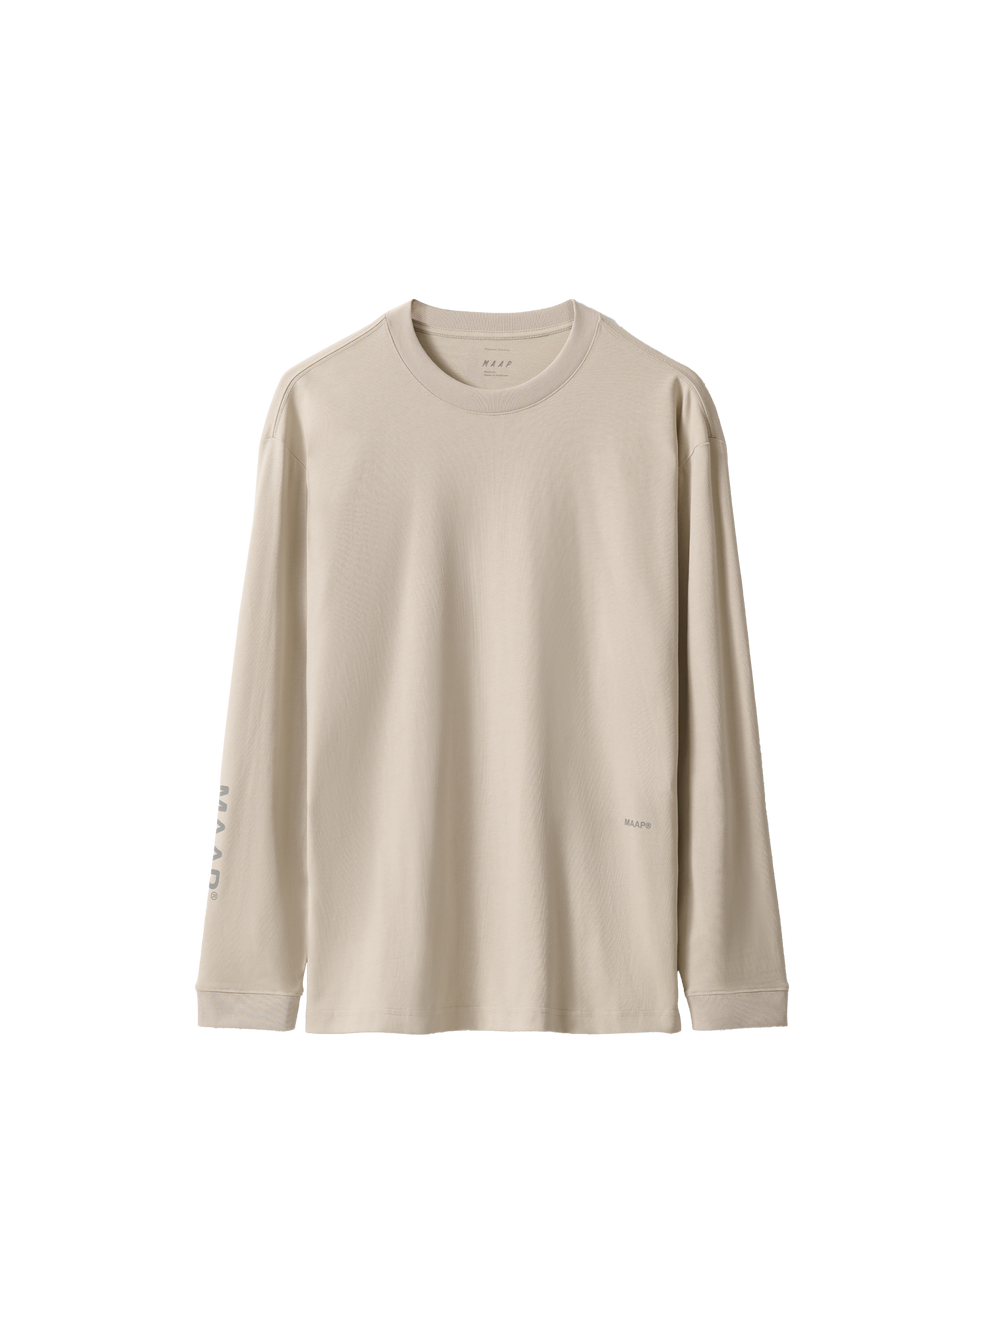 Product Image for Essentials LS Tee